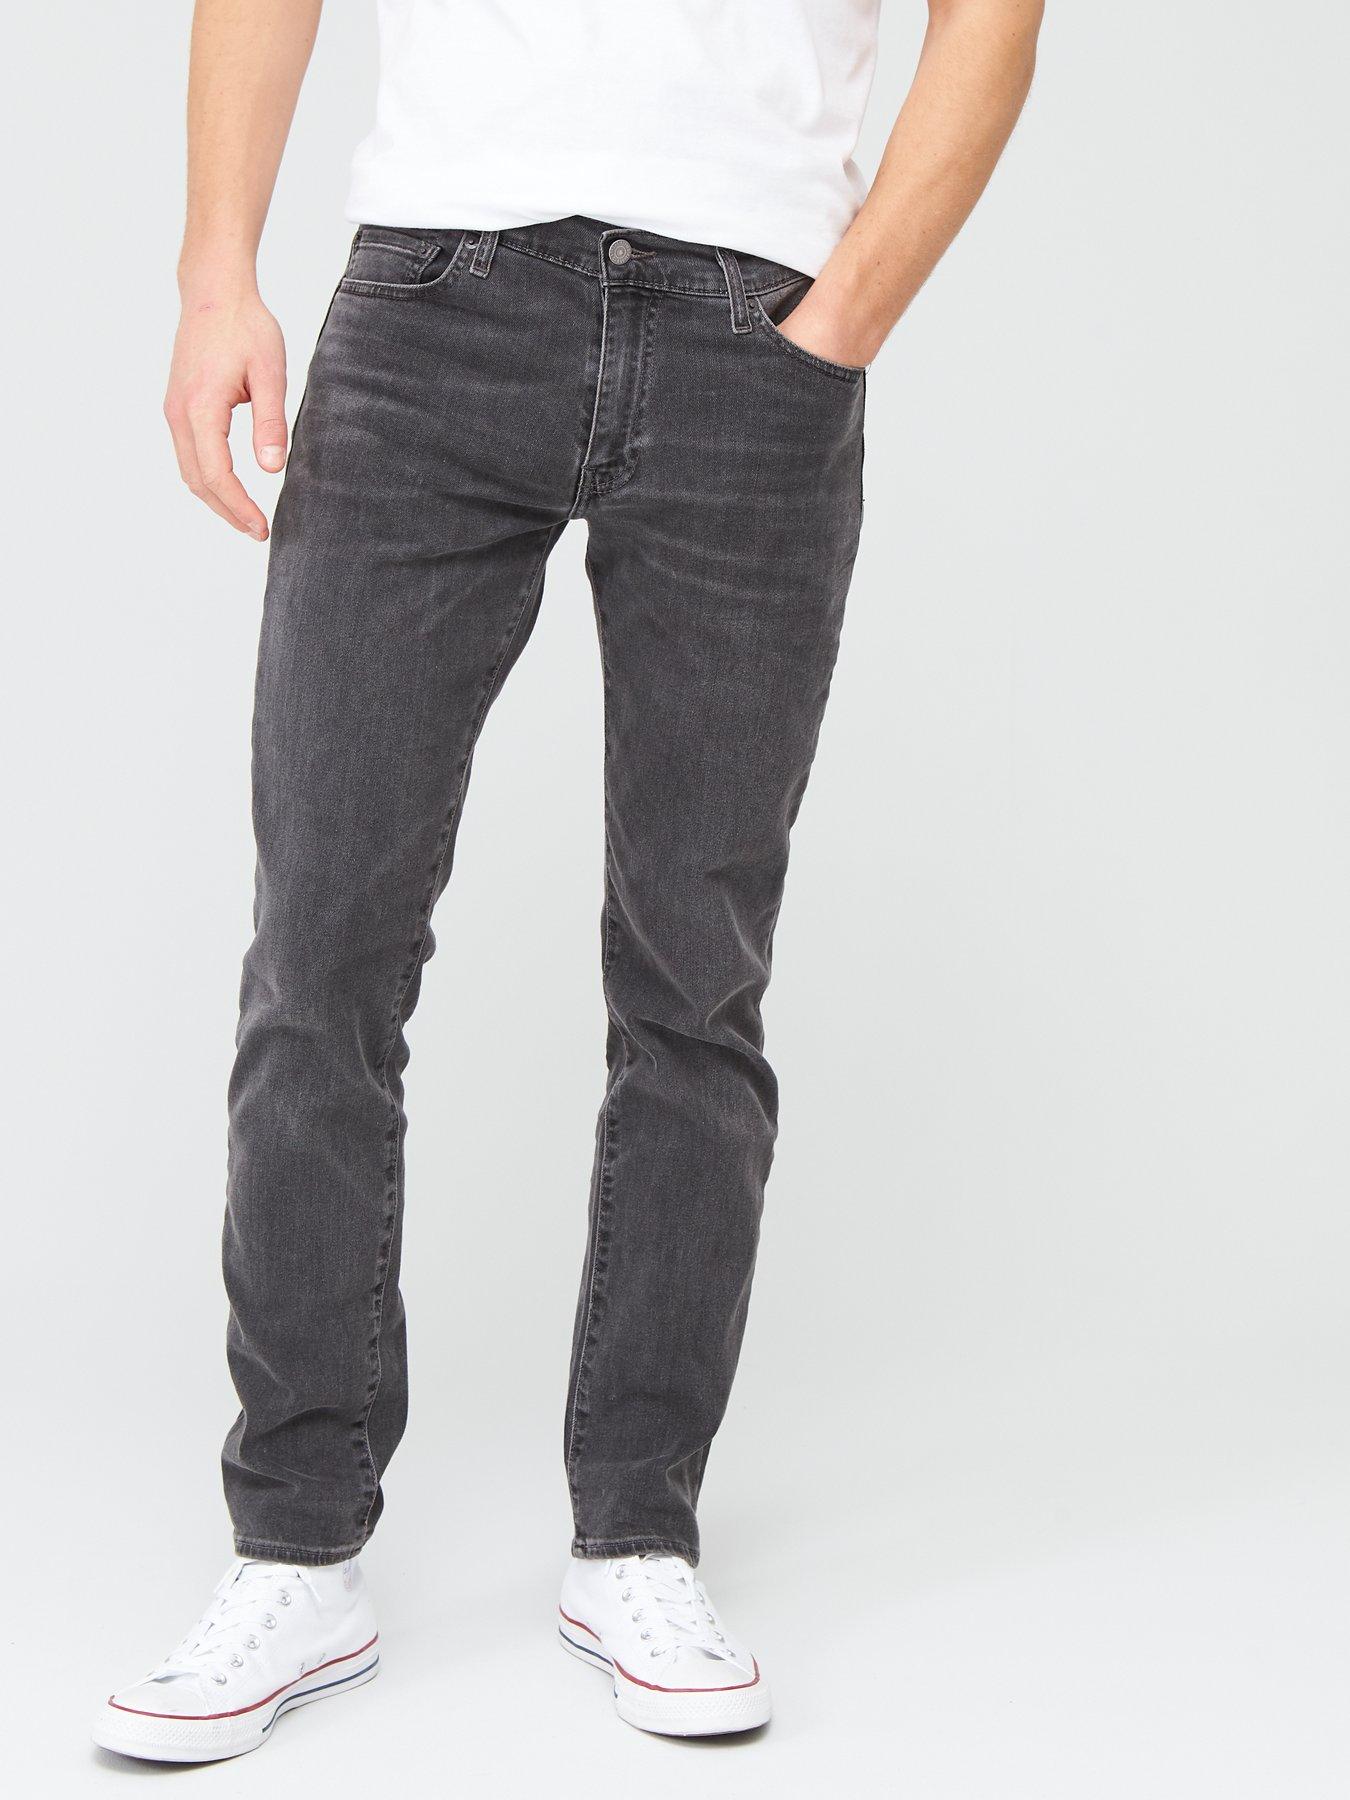 Levi's 511® Slim Fit Jeans - Headed 